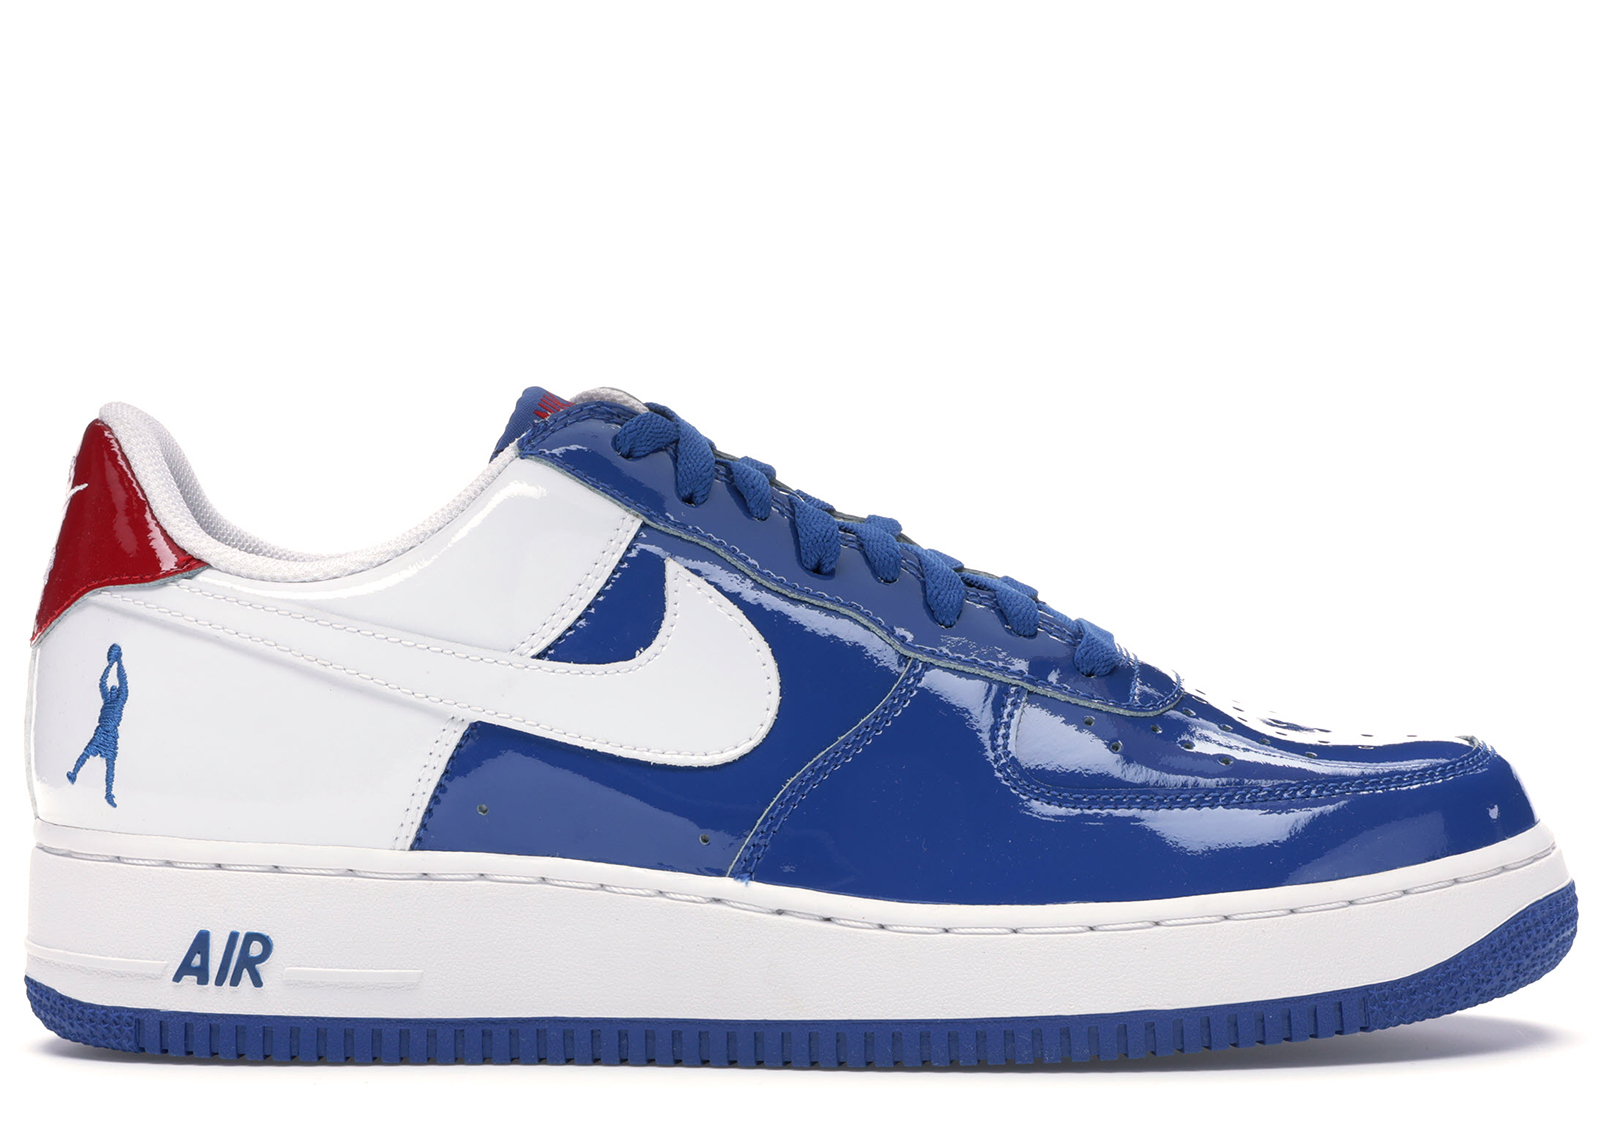 Nike Air Force 1 Low Sheed Blue Jay Men's - 306347-411 - US